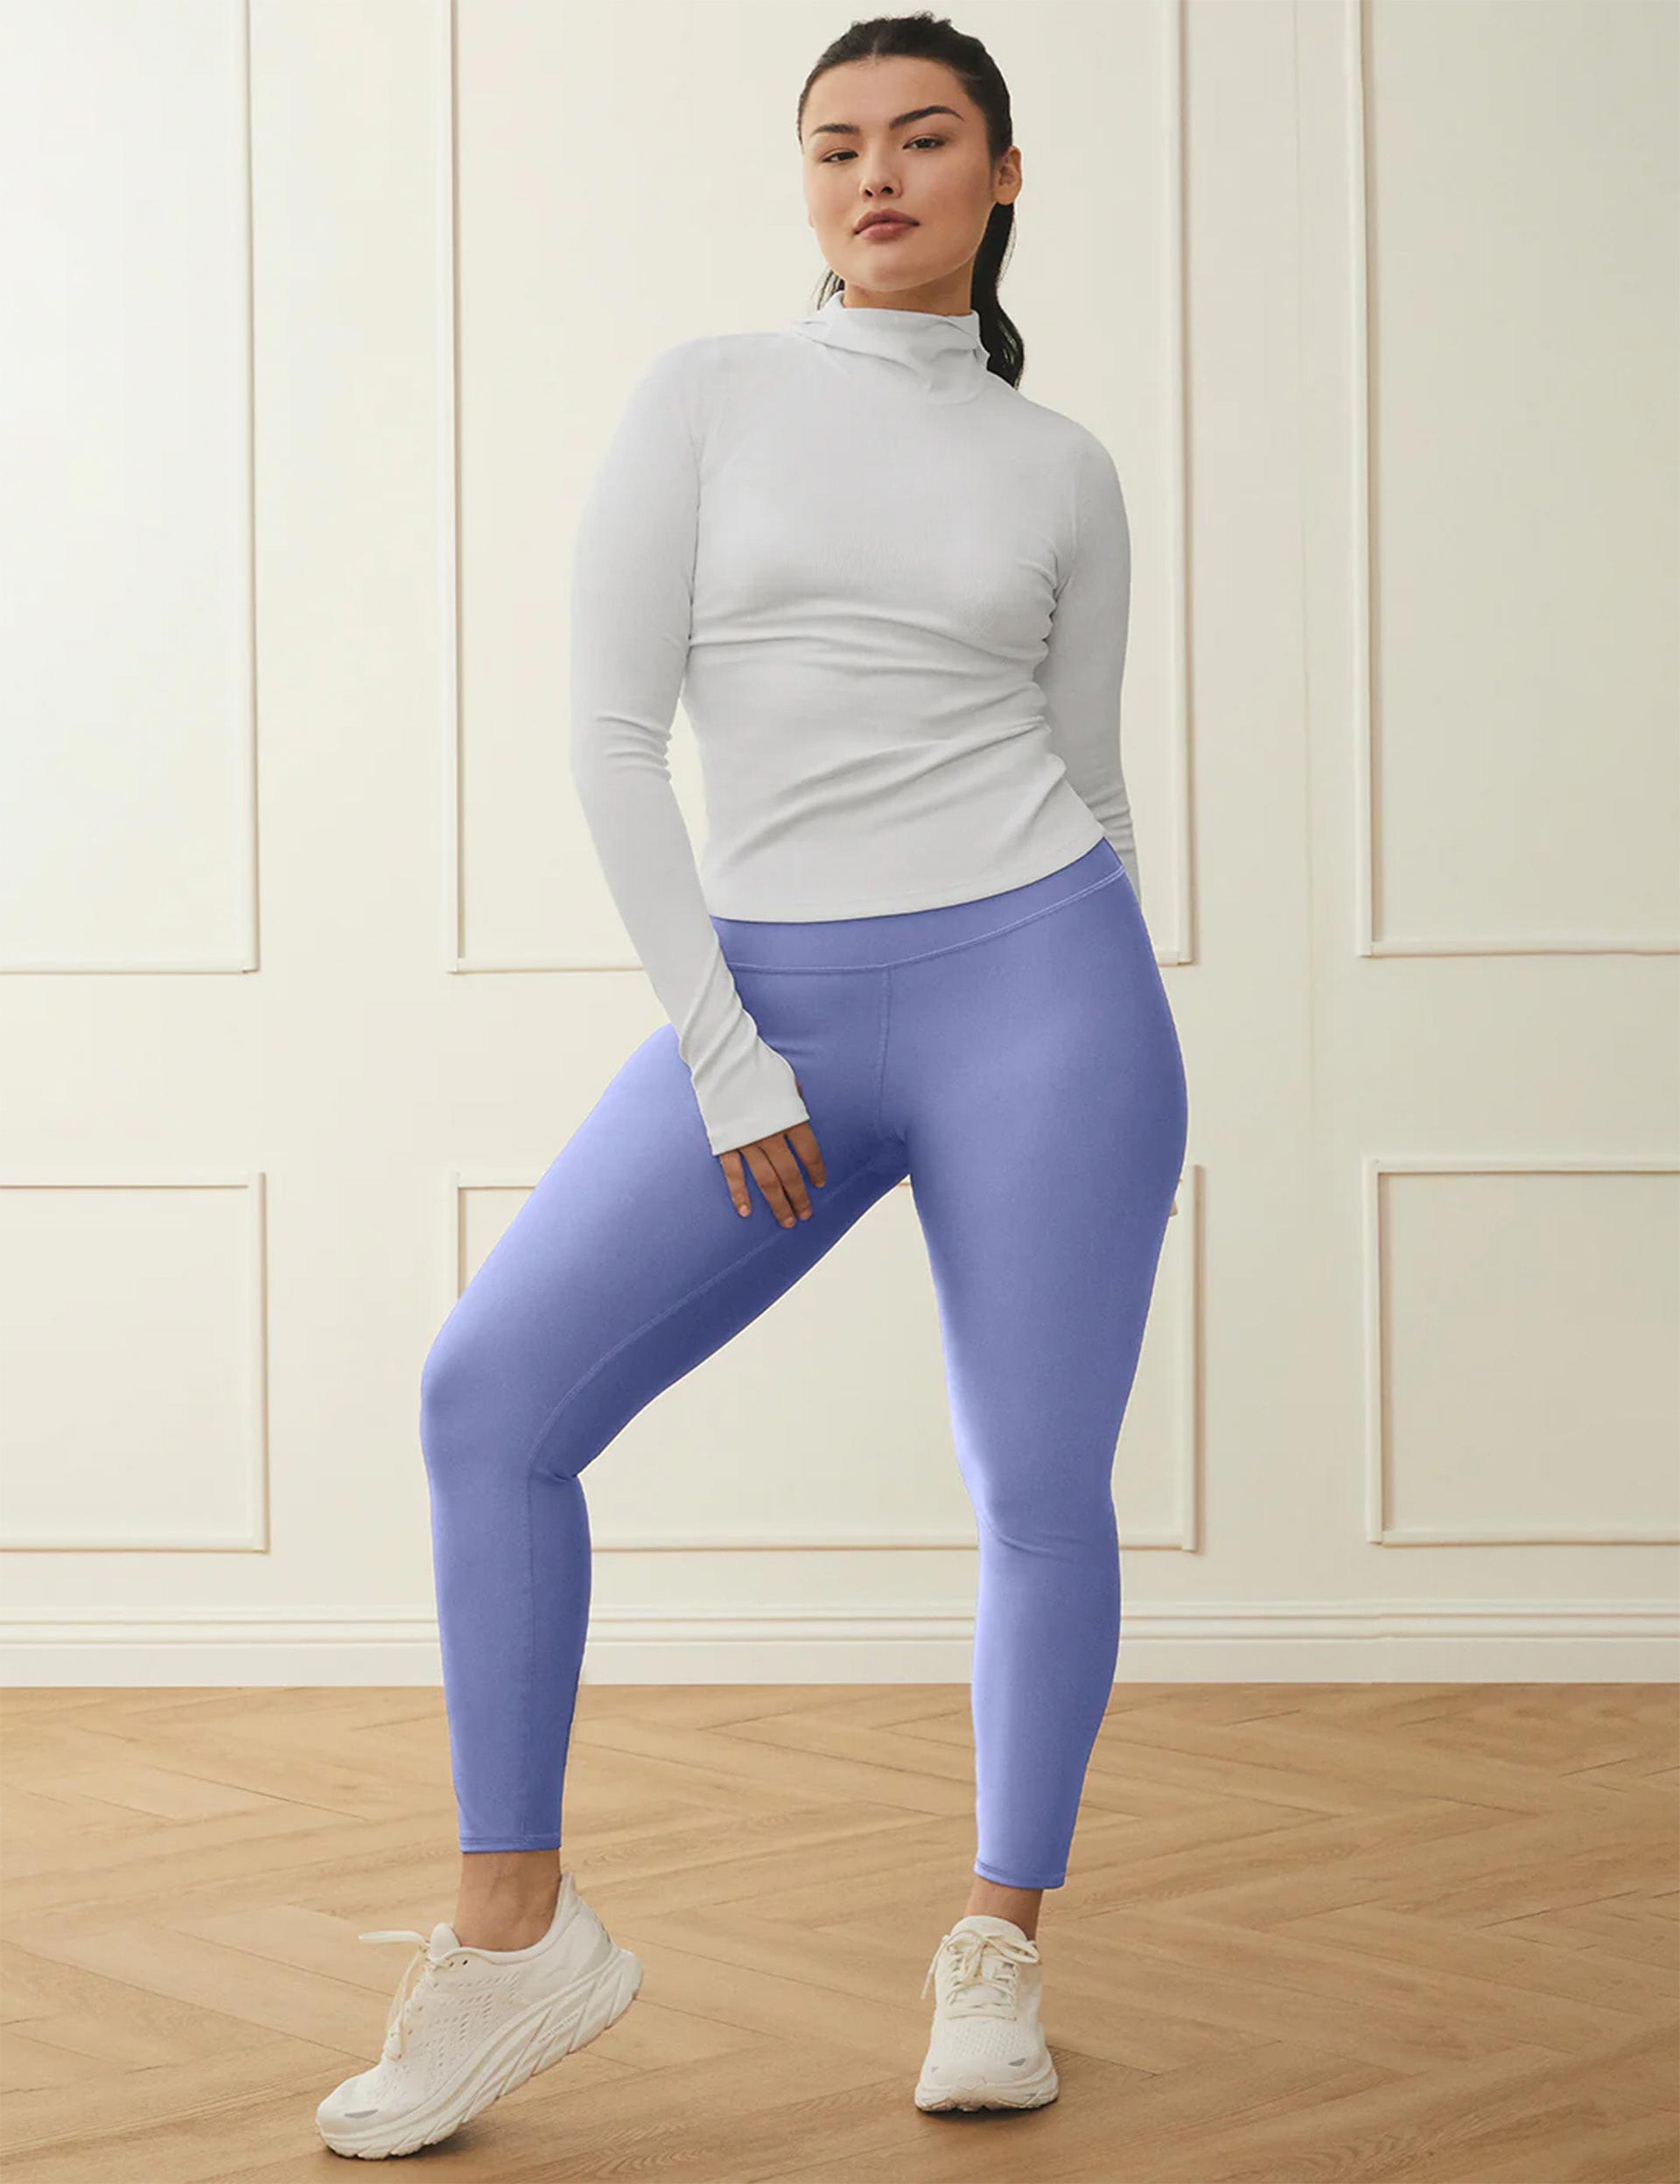 ALO YOGA Checkpoint 7/8 cropped stretch leggings in Dark Navy